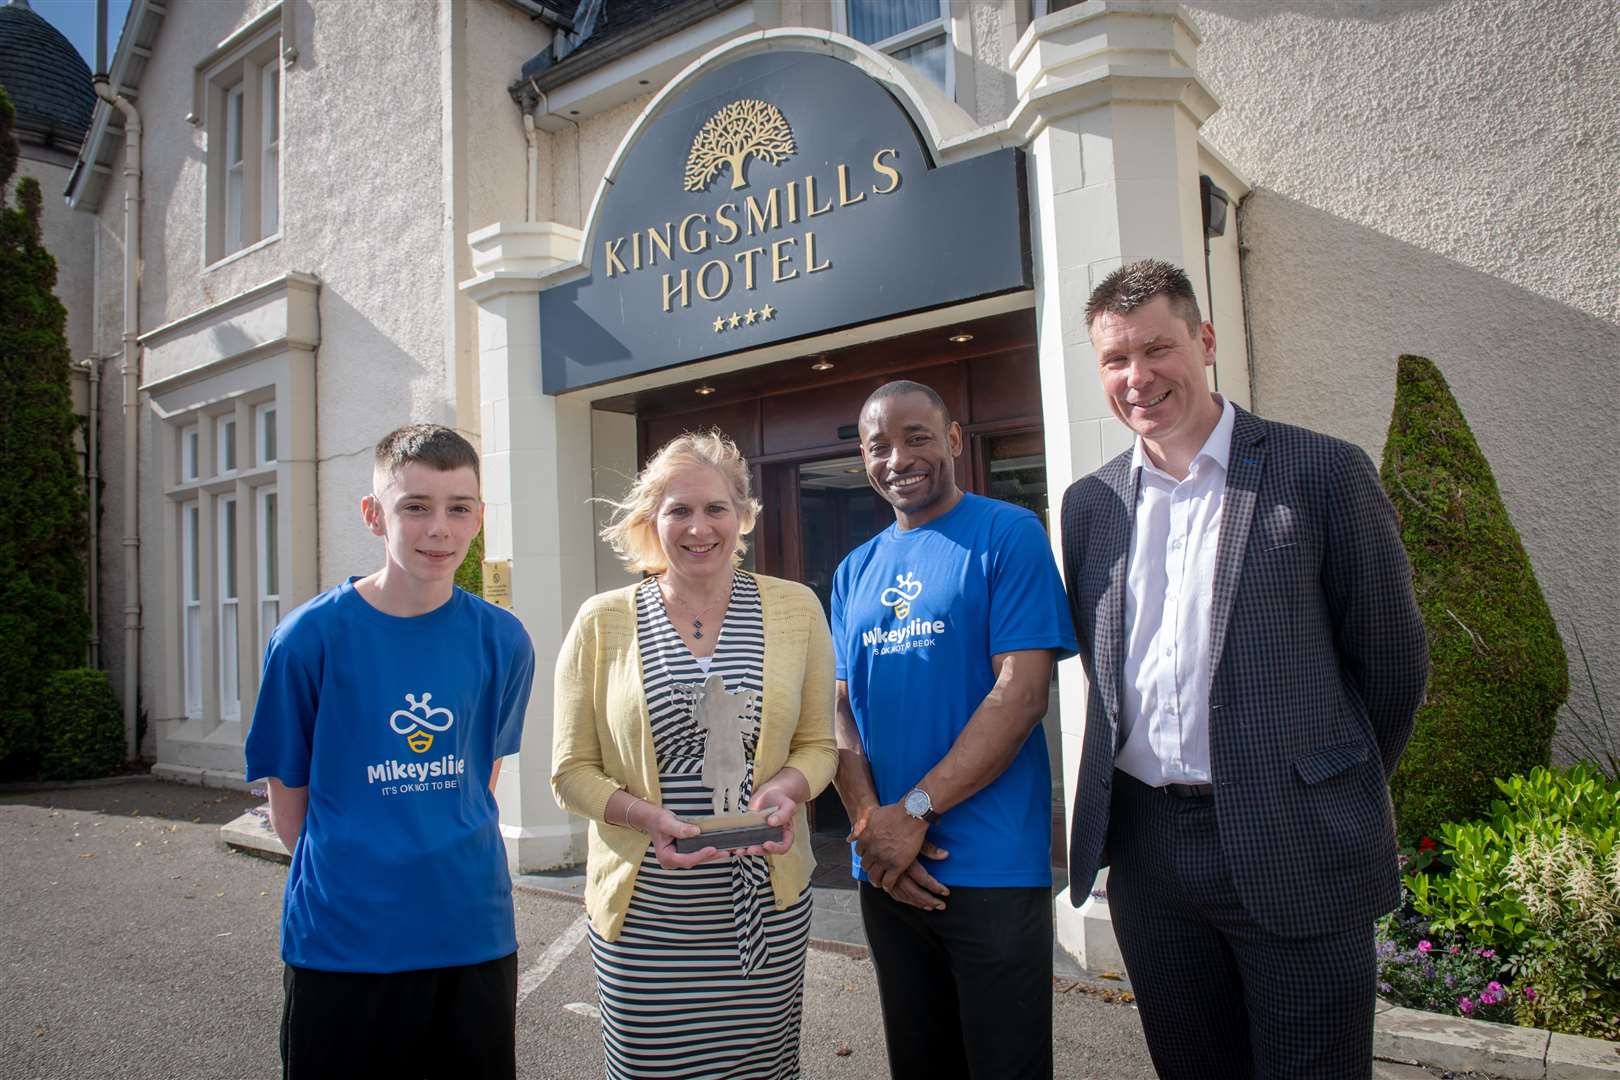 Launching the Awards charity partnership with Mikeysline is Connor Rodden, Mikeysline CEO Emily Stokes, Ricardo Downer and operations director of the Kingsmills Group, Craig Ewan. Picture: Callum Mackay